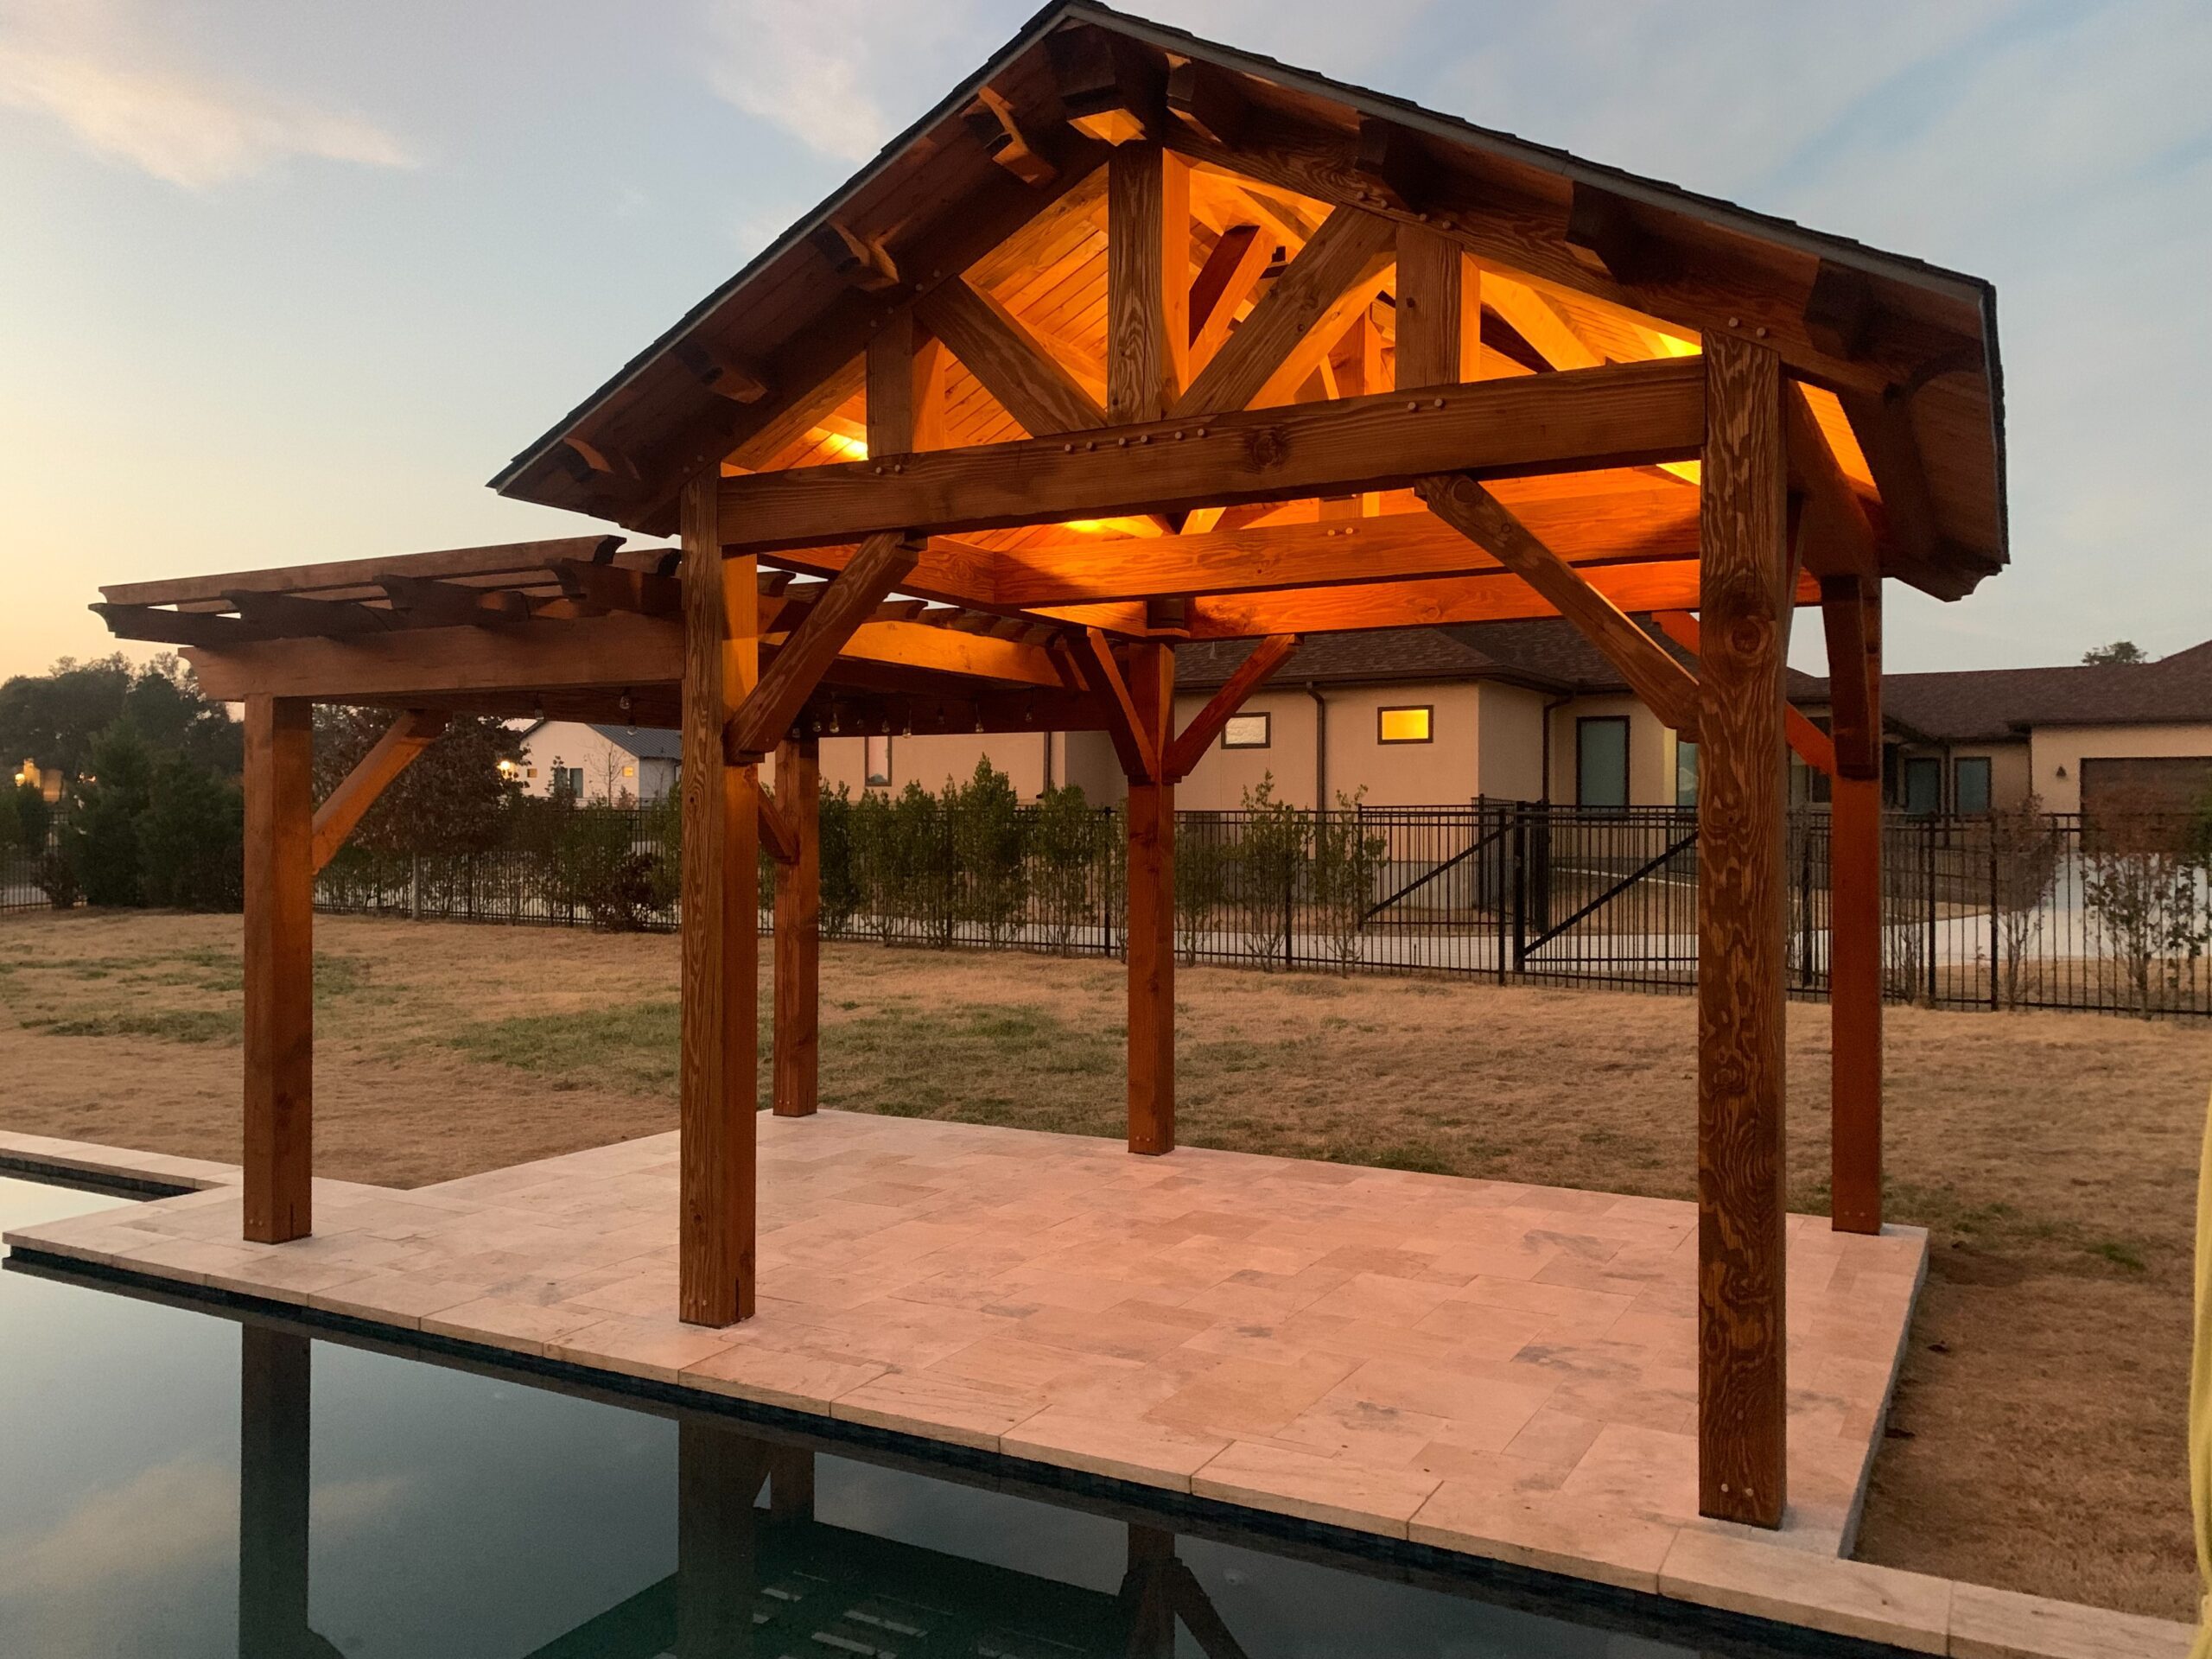 knife blade, Houston, 12' x 12', heavy timbers, shingle roof, douglas fir, queen post half hip, pavilion with pergola, lighting, pavers, free standing pavilion, shade structure, poolside or swimming pool, builder/contractor, covered patio